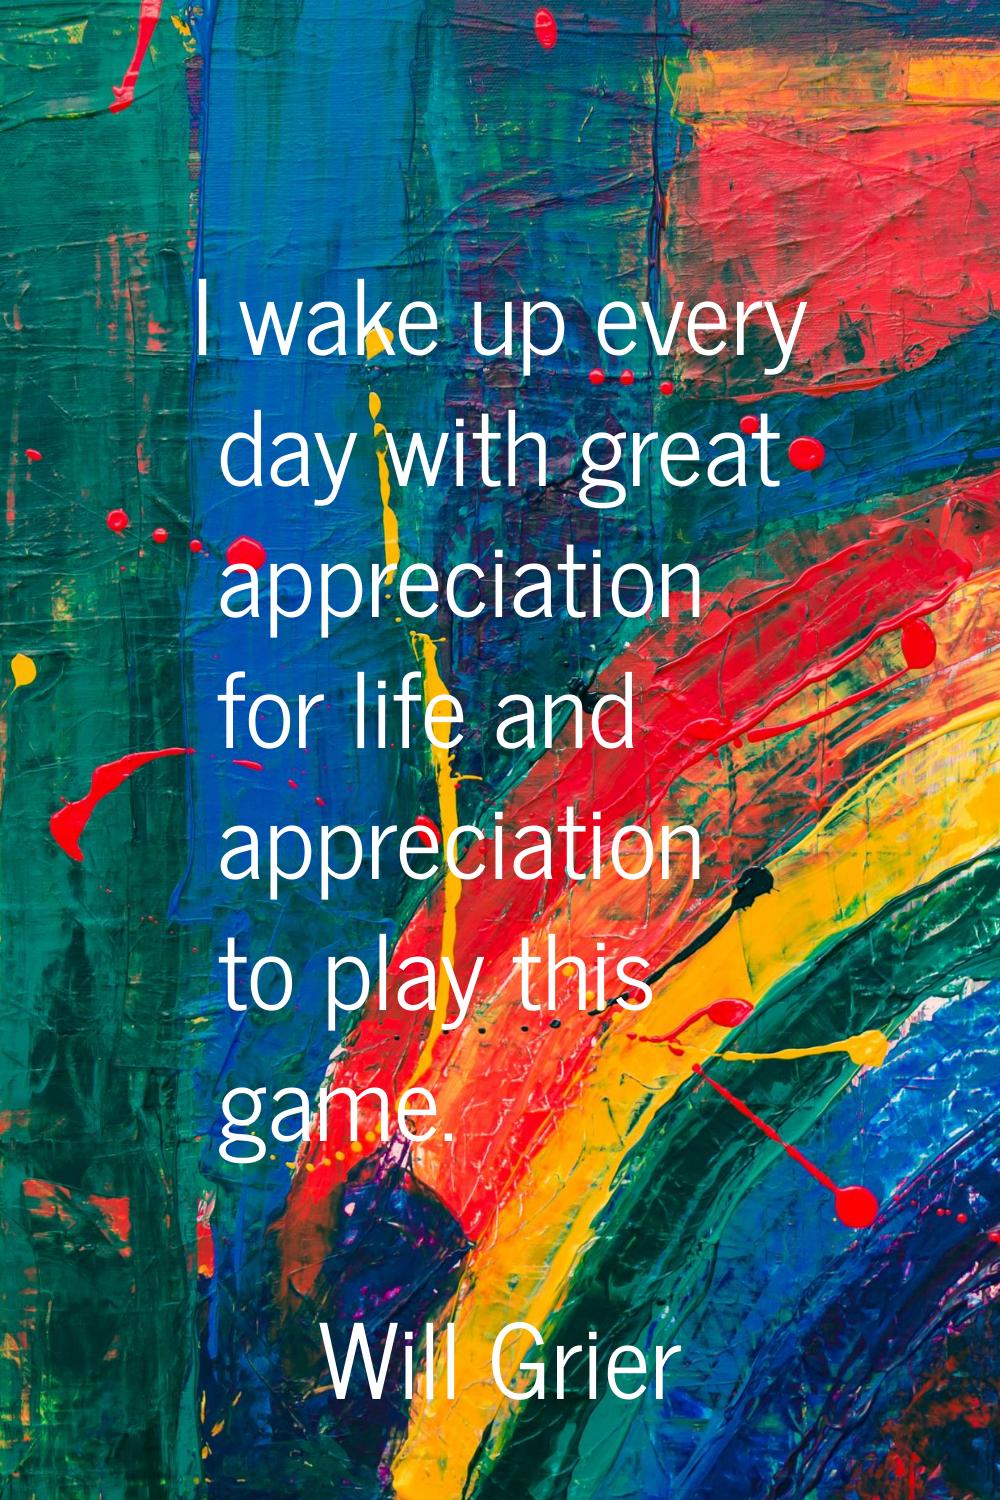 I wake up every day with great appreciation for life and appreciation to play this game.